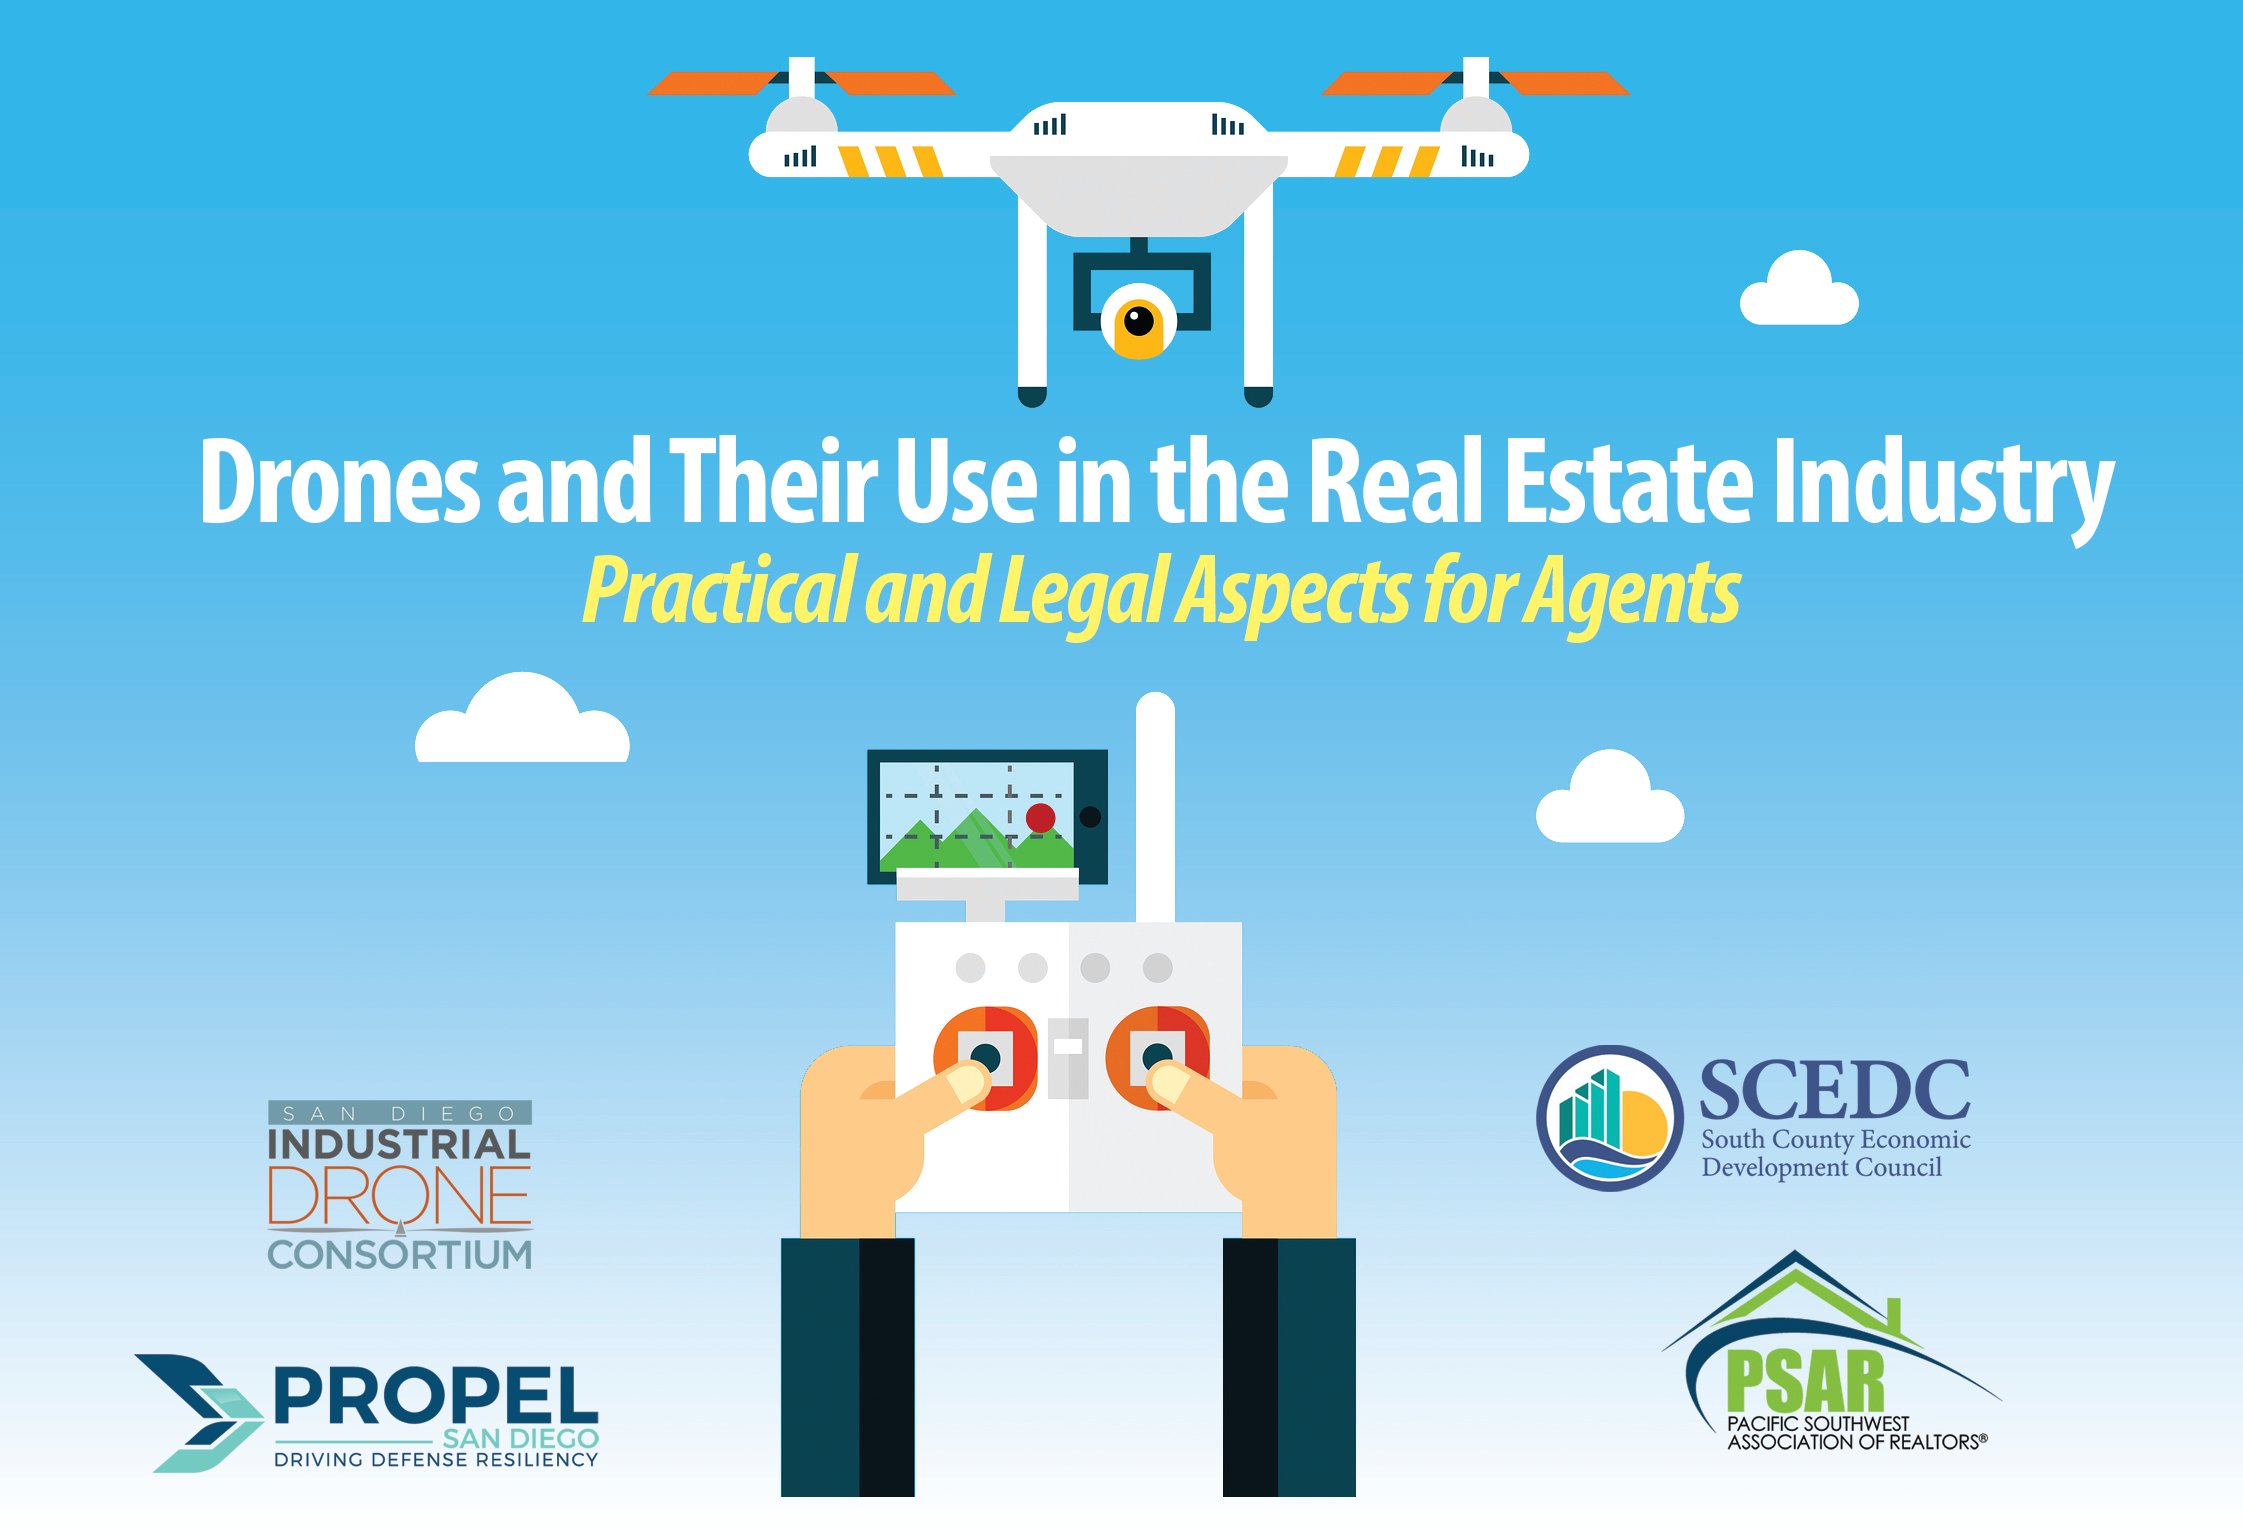 Drone use in real estate